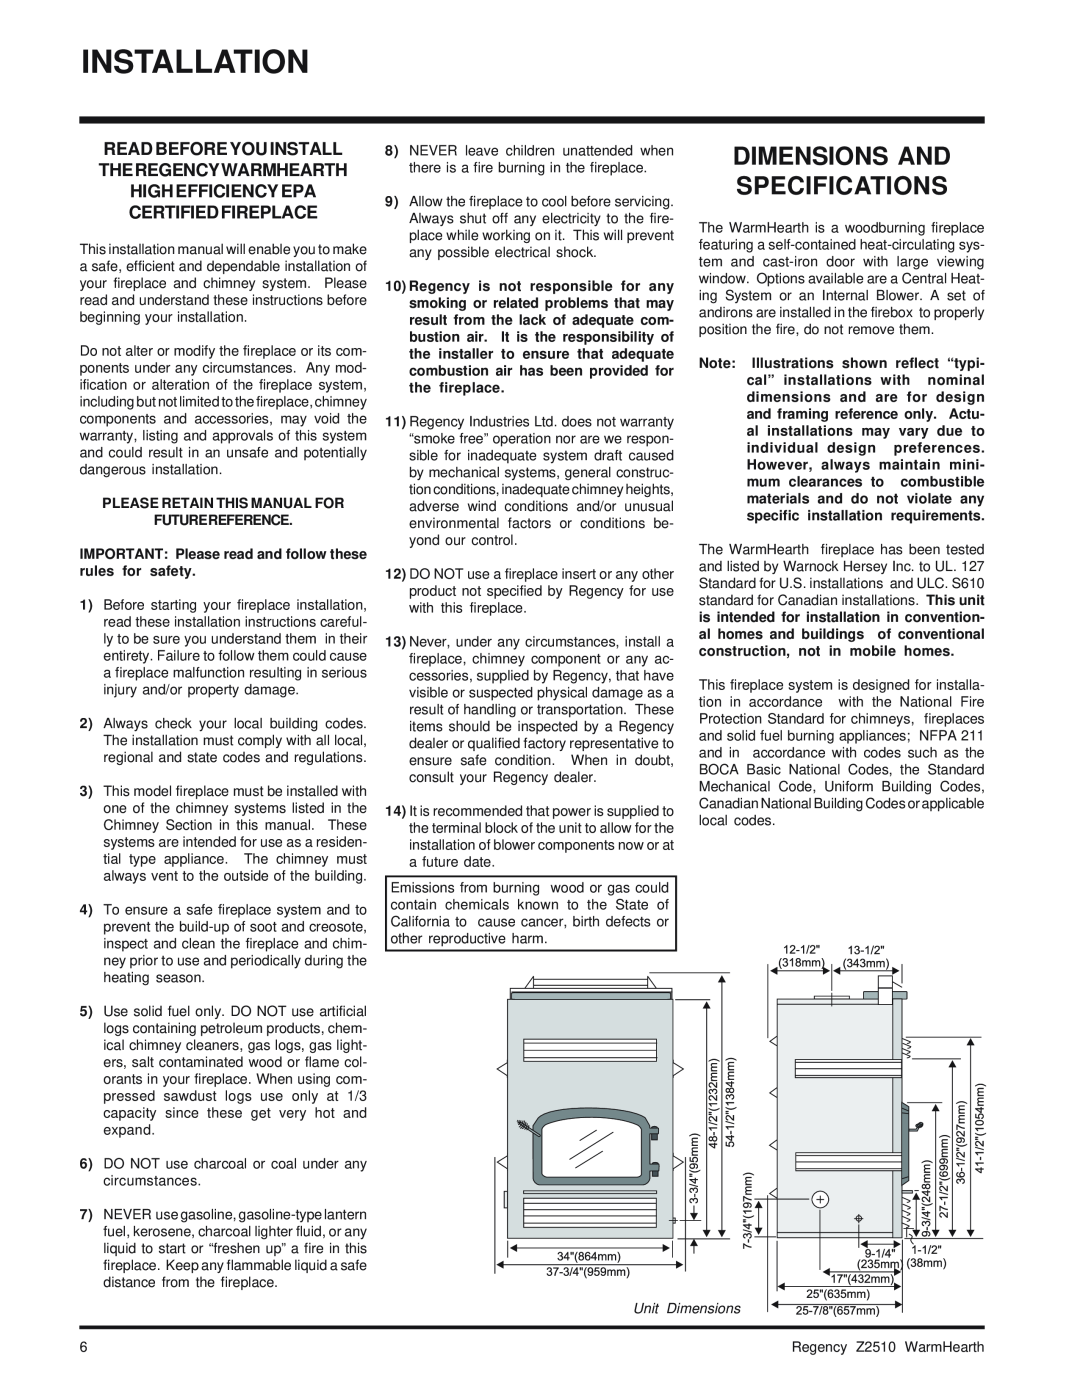 Regency Wraps Z2510L Installation, Dimensions And Specifications, Please Retain This Manual For Futurereference 